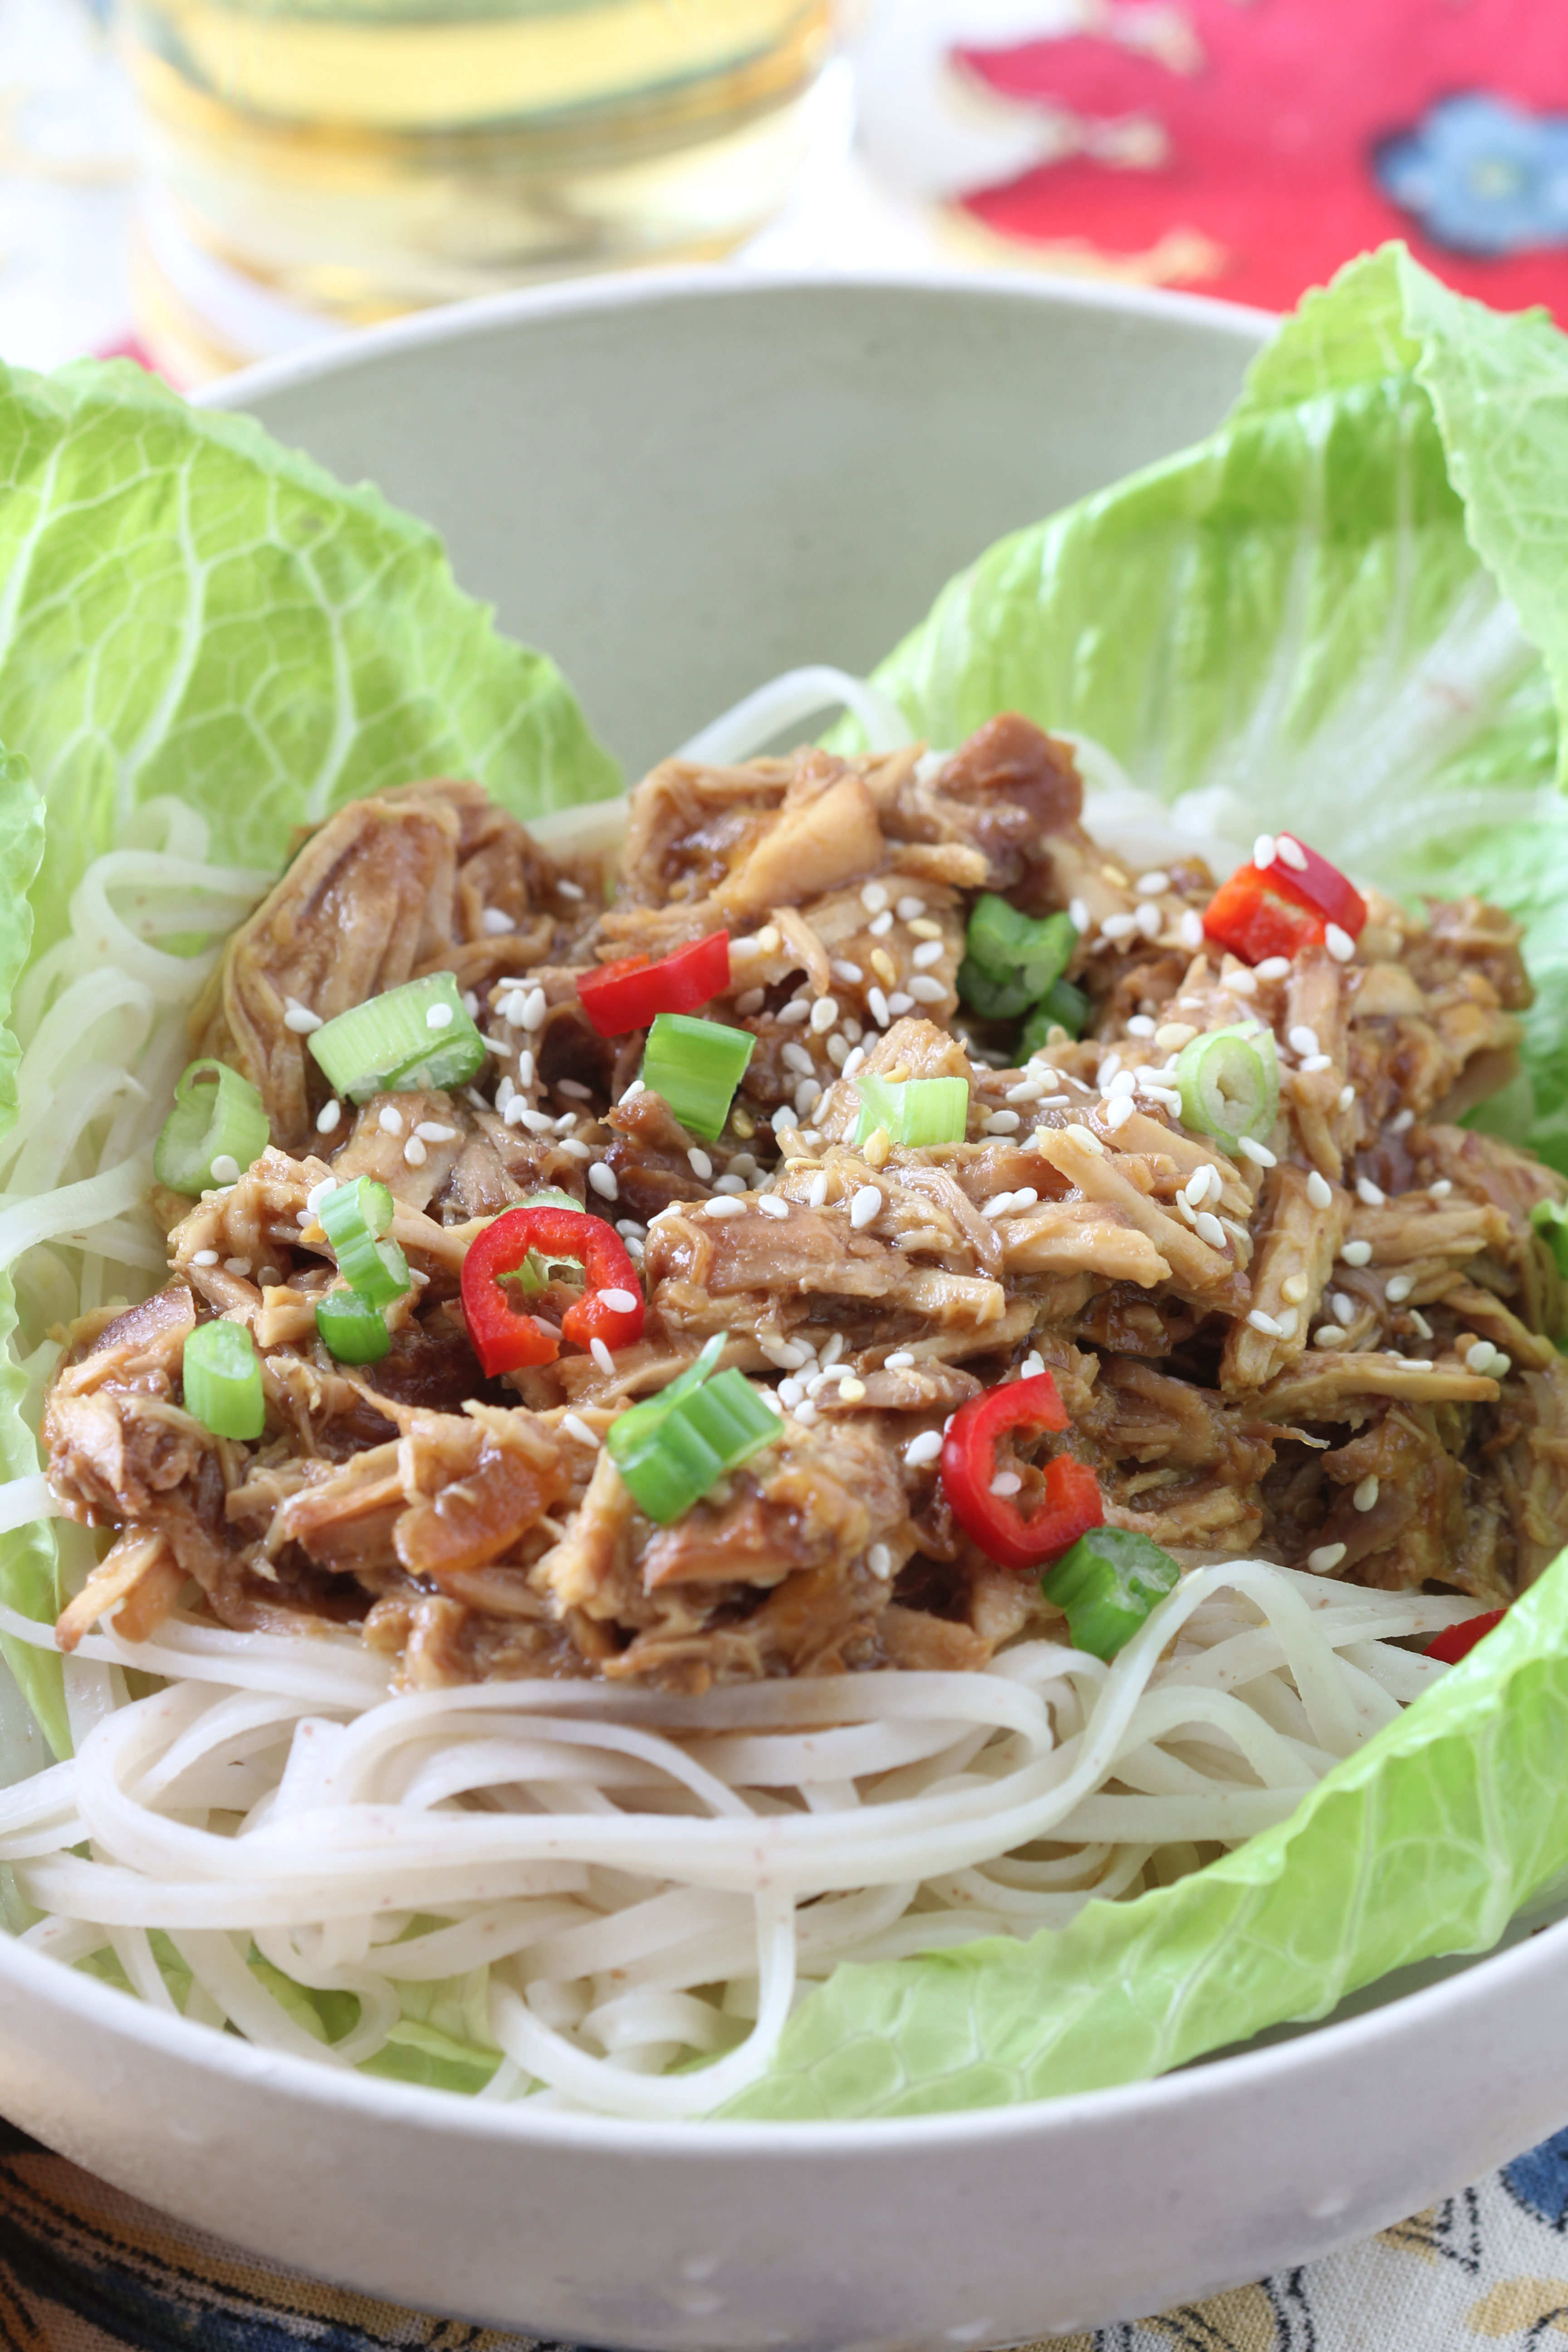 Looking for a new recipe, Ridgely Brode and her husband made Honey Sesame Pulled Pork Slow Cooker and Thai Cucumber Salad.